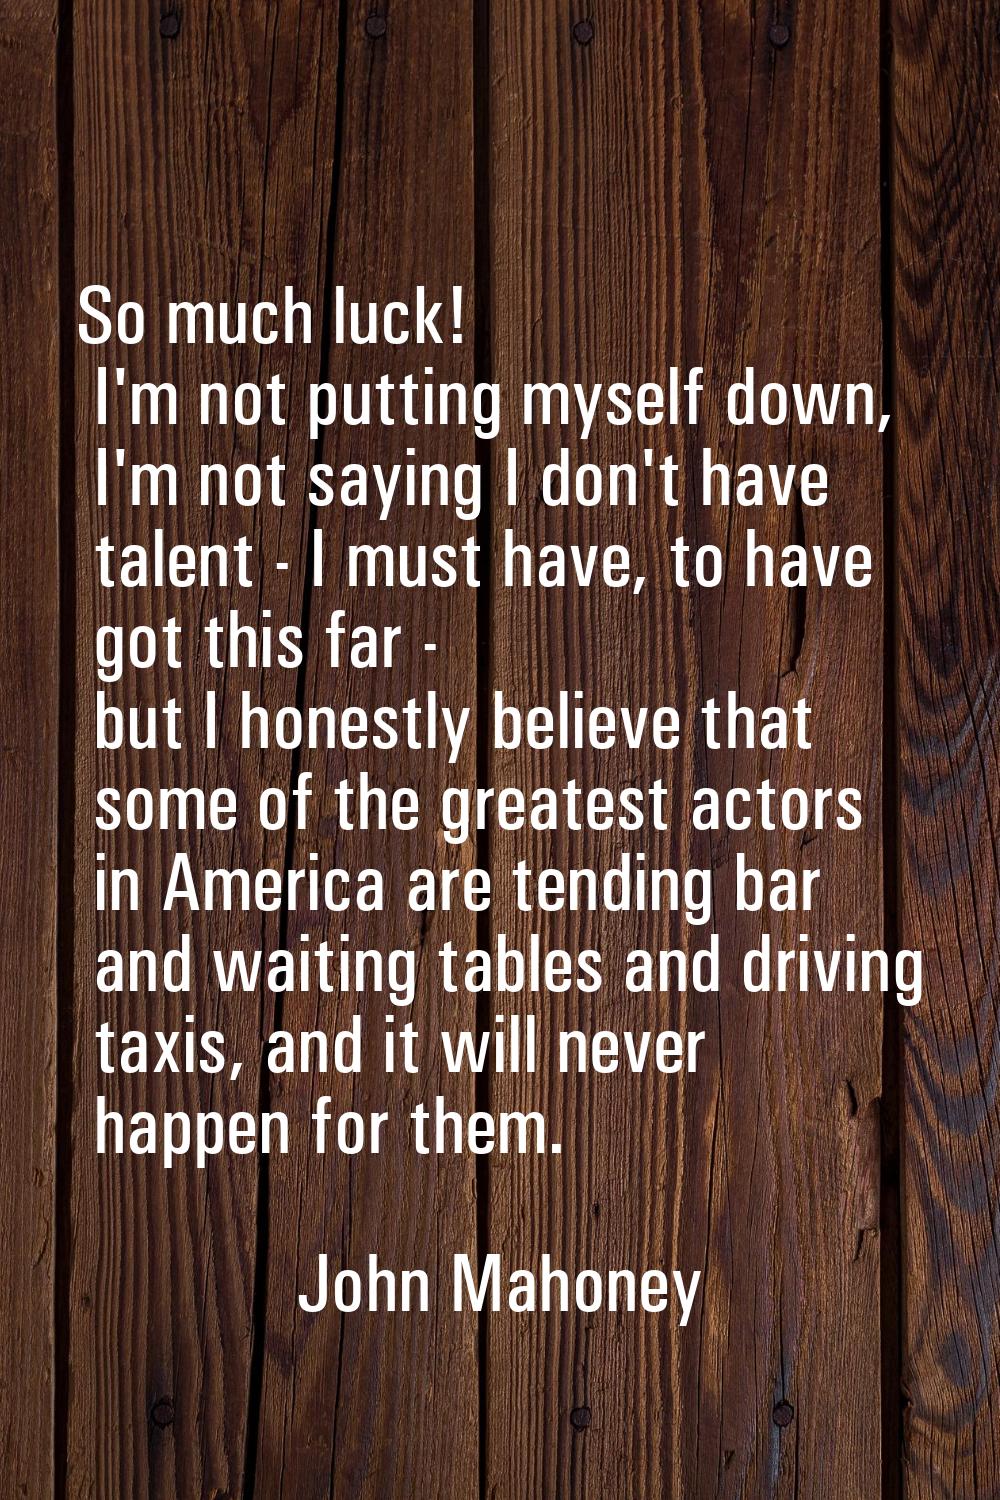 So much luck! I'm not putting myself down, I'm not saying I don't have talent - I must have, to hav